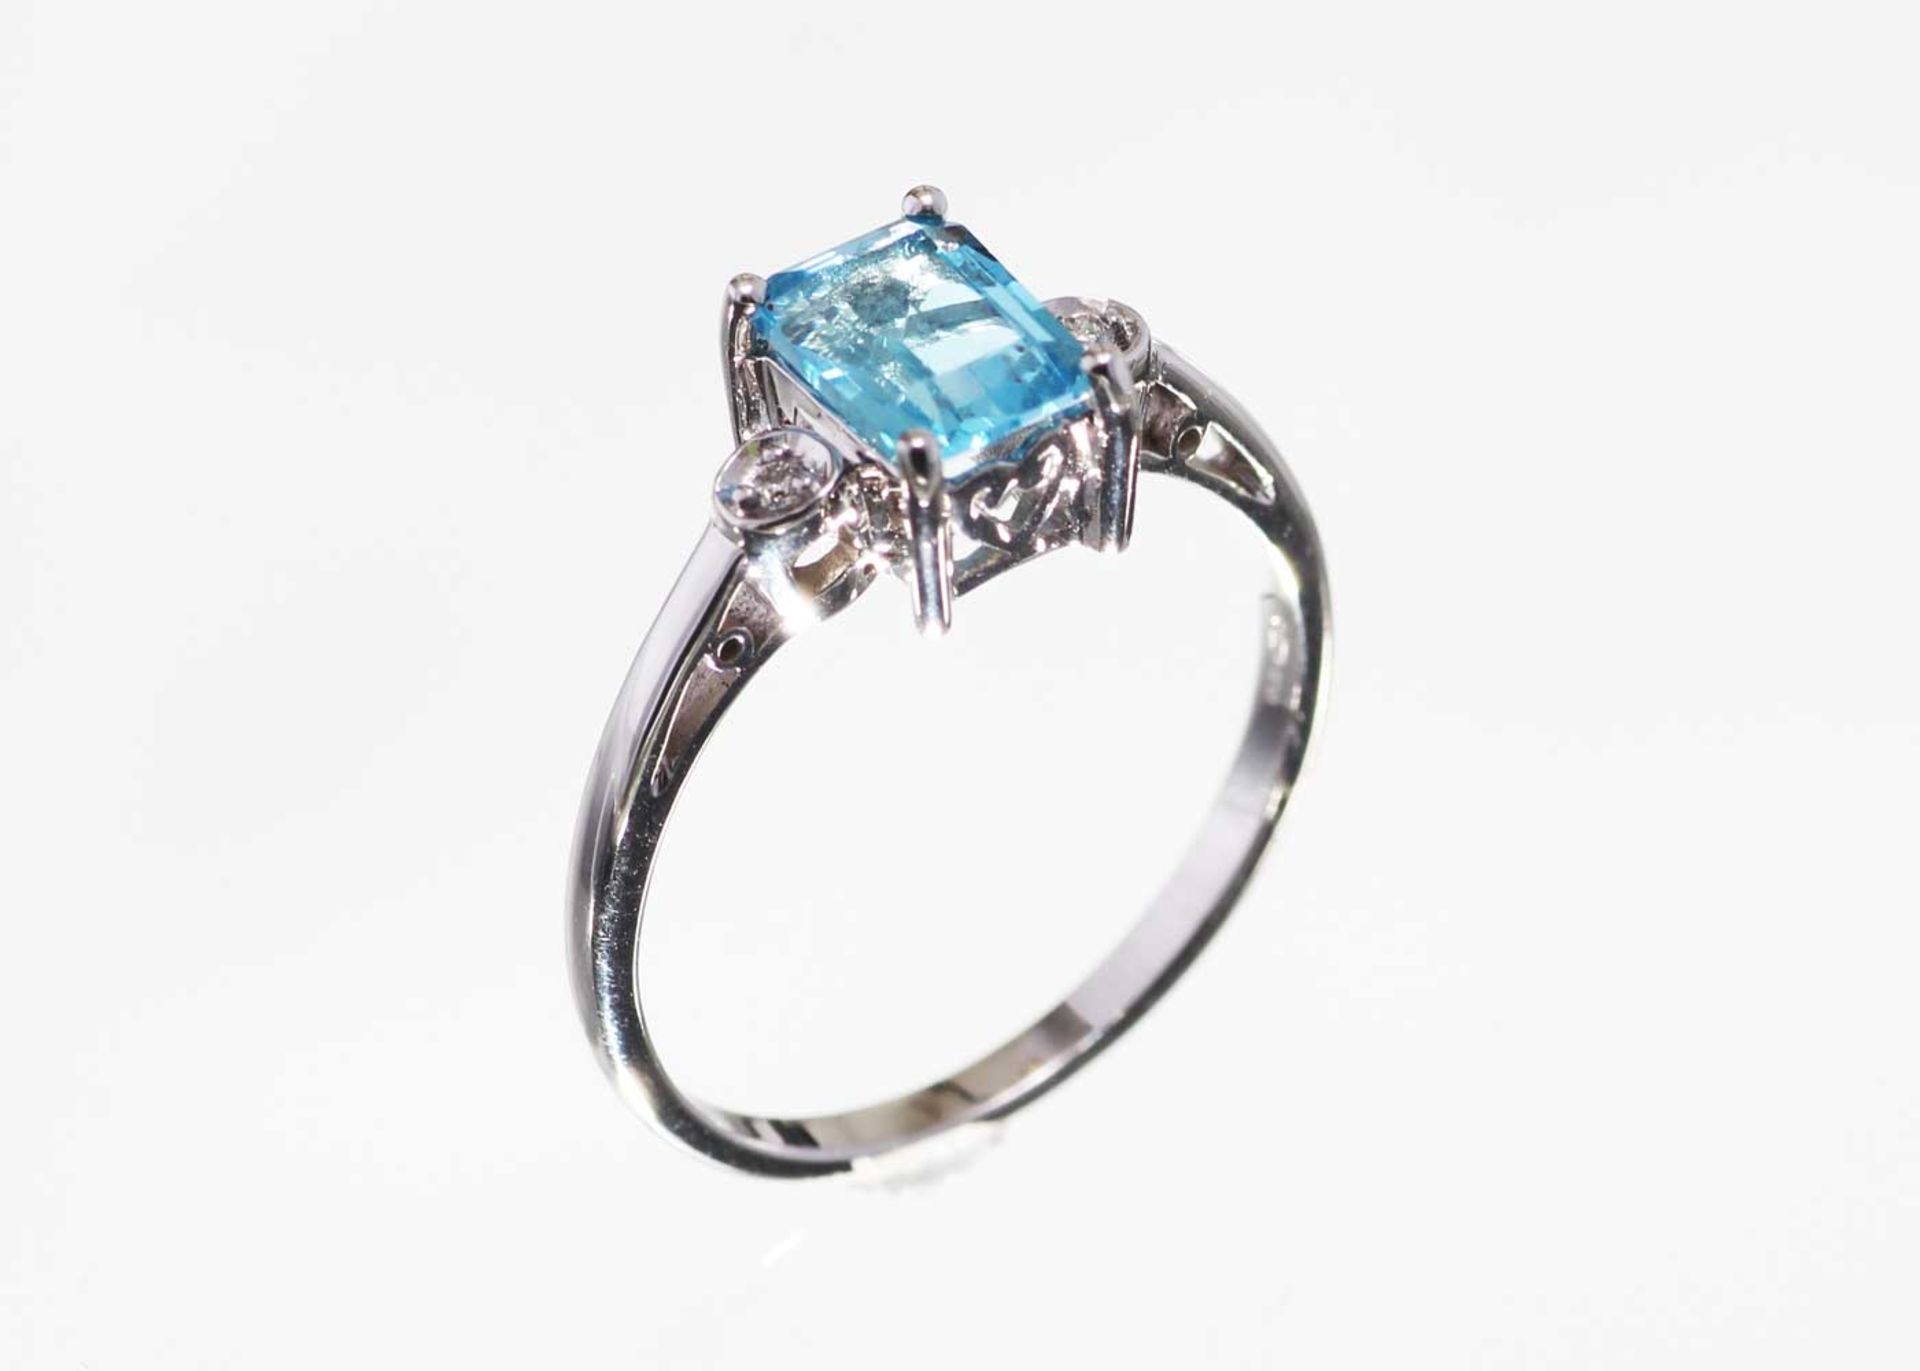 9ct White Gold Blue Topaz Diamond Ring 0.02 Carats - Valued by GIE £1,220.00 - 9ct White Gold Blue - Image 2 of 5